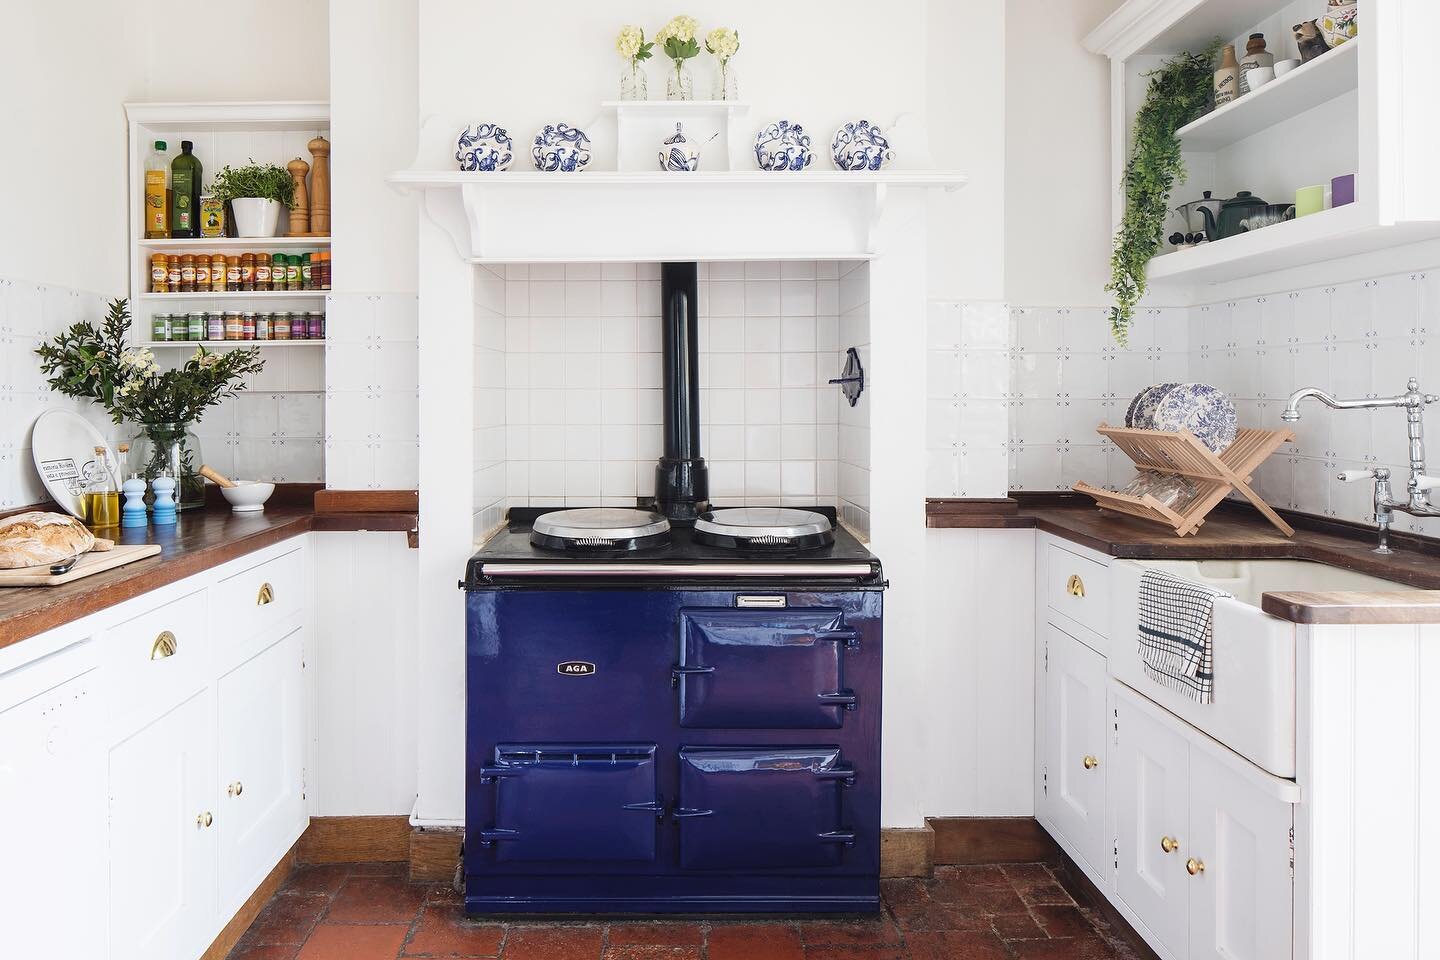 Here&rsquo;s a big dose of insta reality for you! If you&rsquo;re a fellow aga owner you&rsquo;ll be feeling the horrendous pinch of owning one of these at the moment. We&rsquo;re actually too scared to turn her on due to the hefty cost so are using 